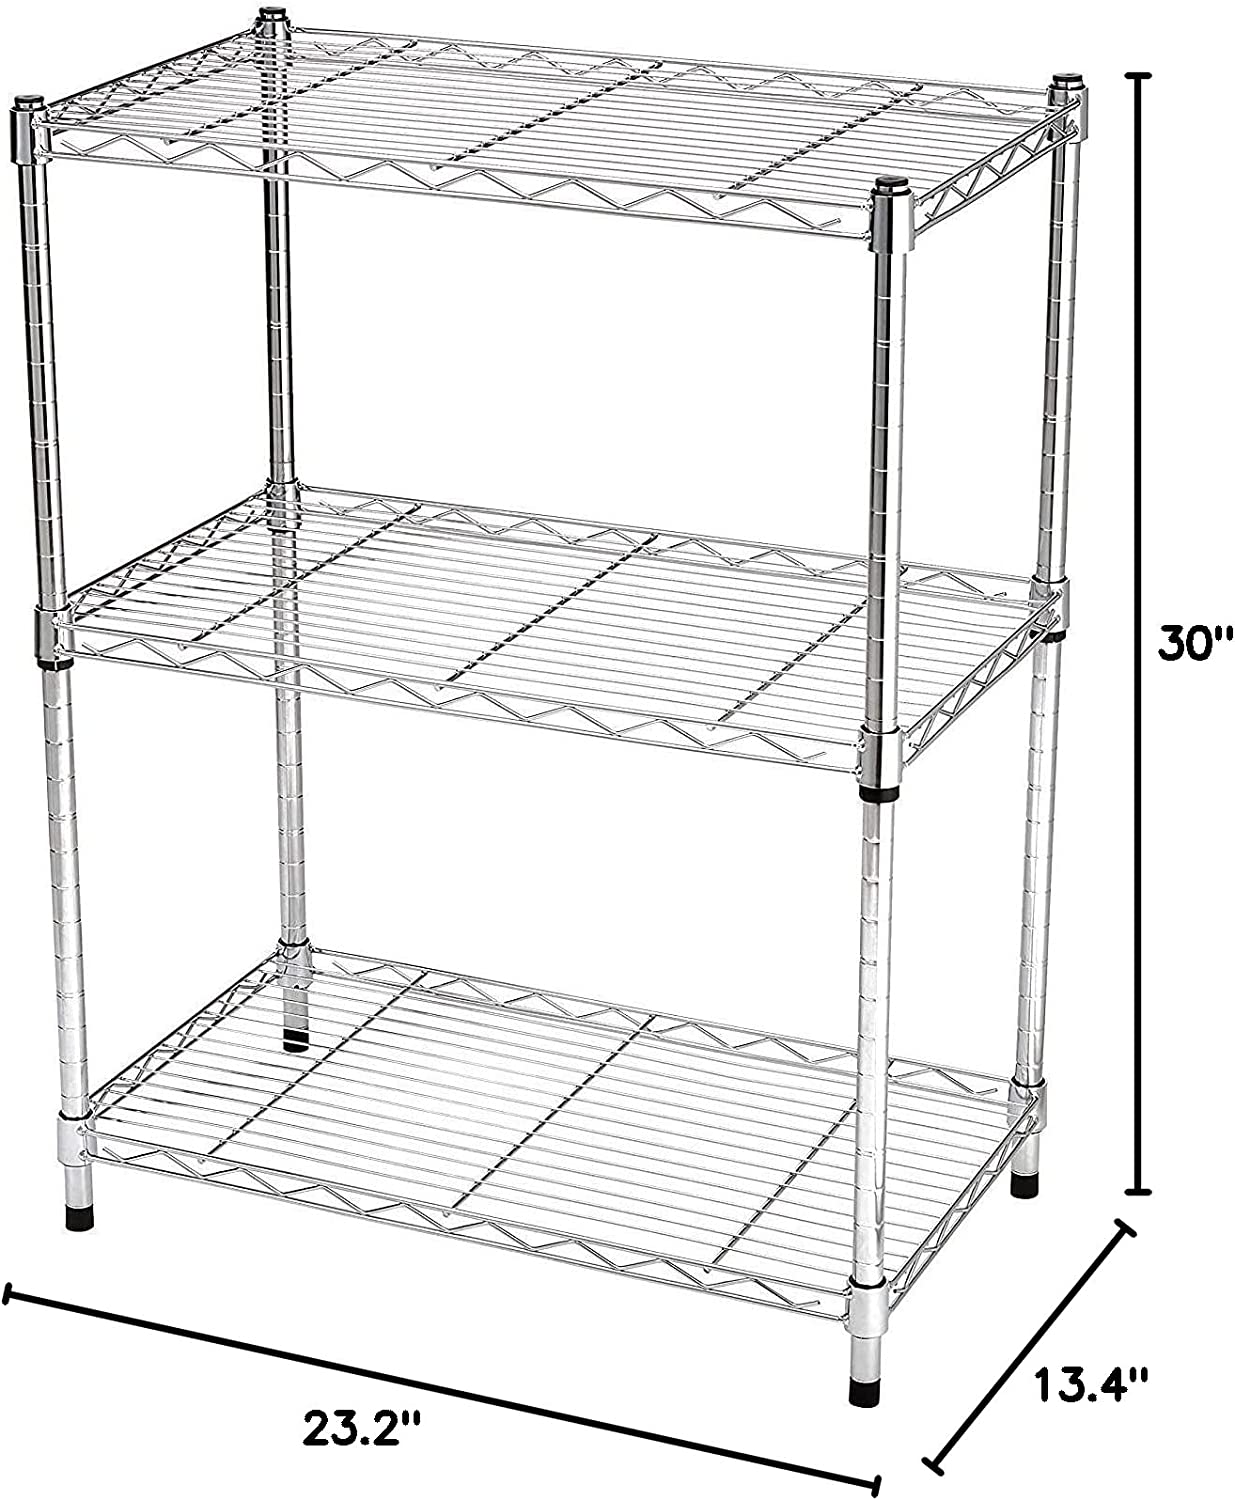 Amazon Basics 3-Shelf Adjustable, reliable wire shelving choice for your pantry